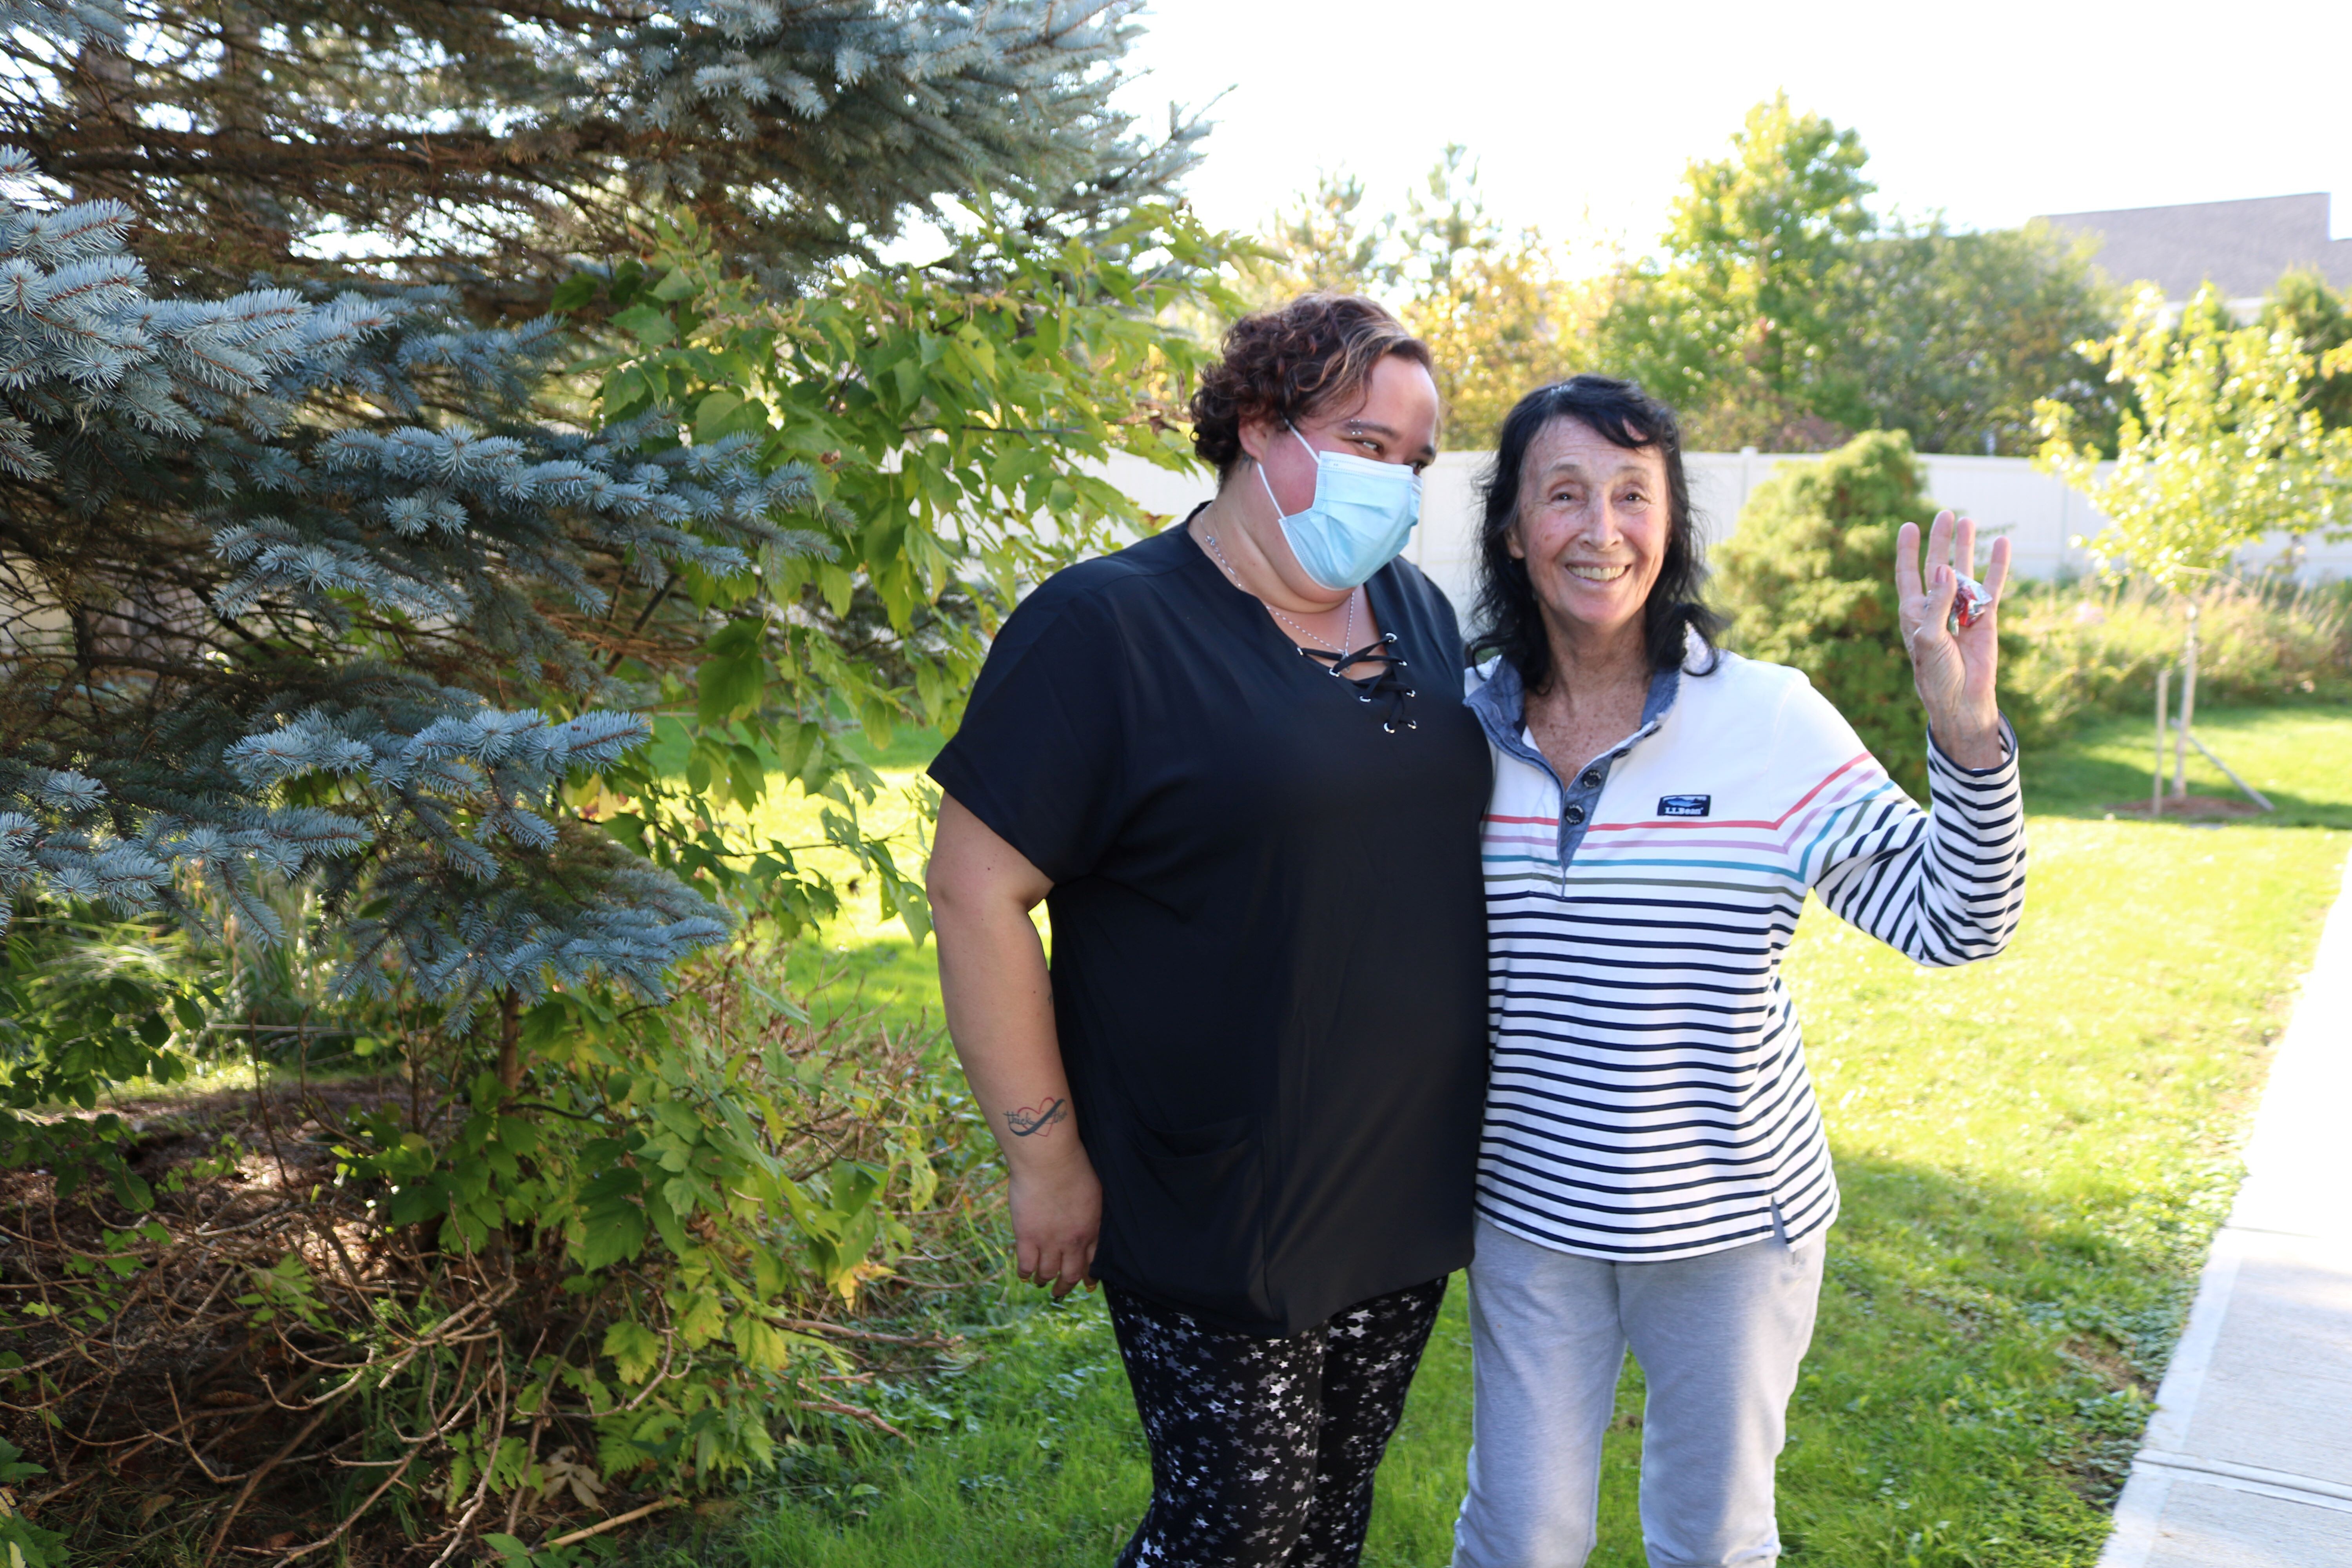 Bethany LeBlanc, a licensed nursing assistant at Allen Brook, spends time outside with her friend and resident Janet